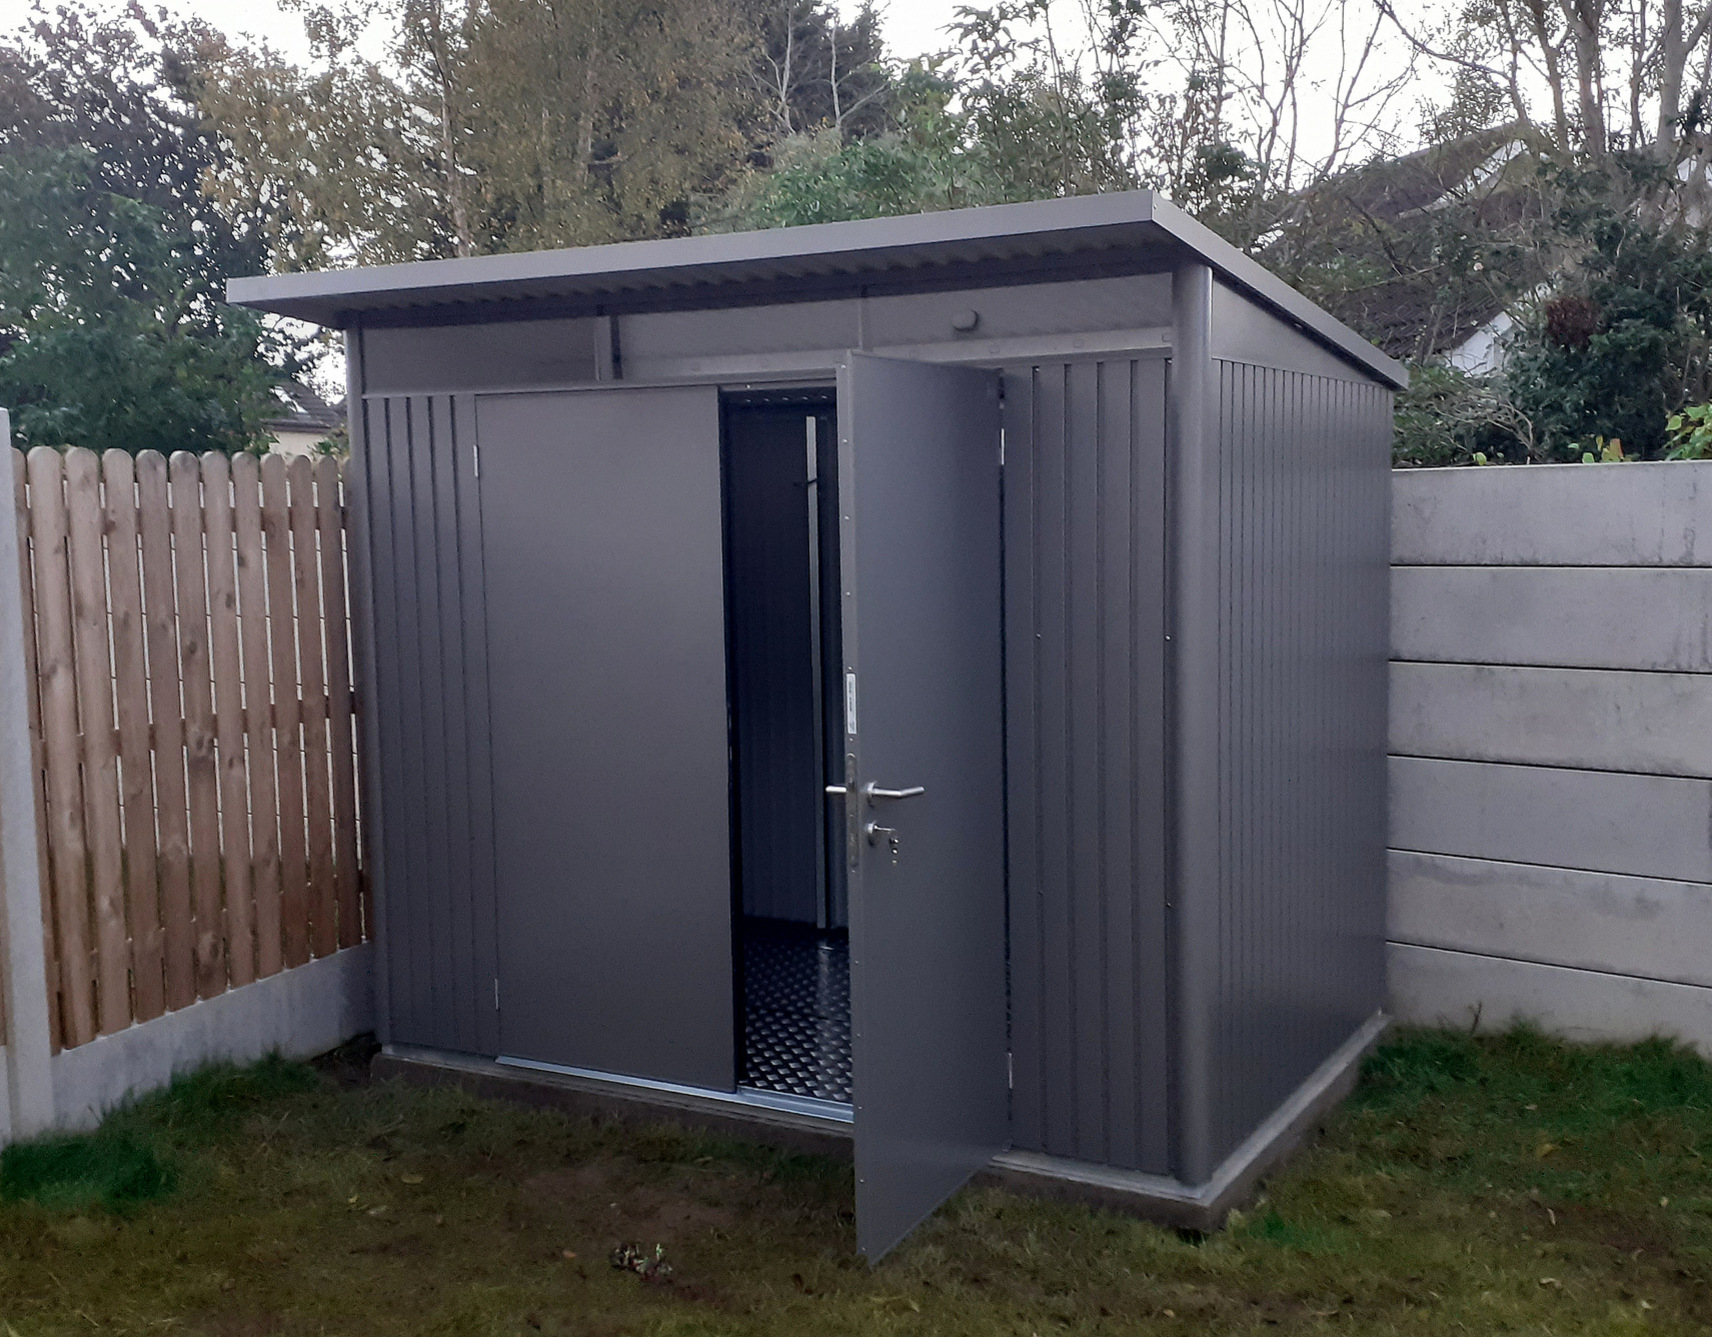 The Biohort AvantGarde A5 Steel Garden Shed in metallic quartz grey with optional accessories including double doors, aluminium floor frame, aluminium floor panels, supplied + fitted in Malahide, Co Dublin | Owen Chubb Garden Landscaper - Ireland's #1 Biohort Dealer, your one-stop shop for Biohort Sheds & Storage. Shop with confidence. Best Prices in Ireland. Fast Delivery & Installation nationwide. Tel 087-2306128.